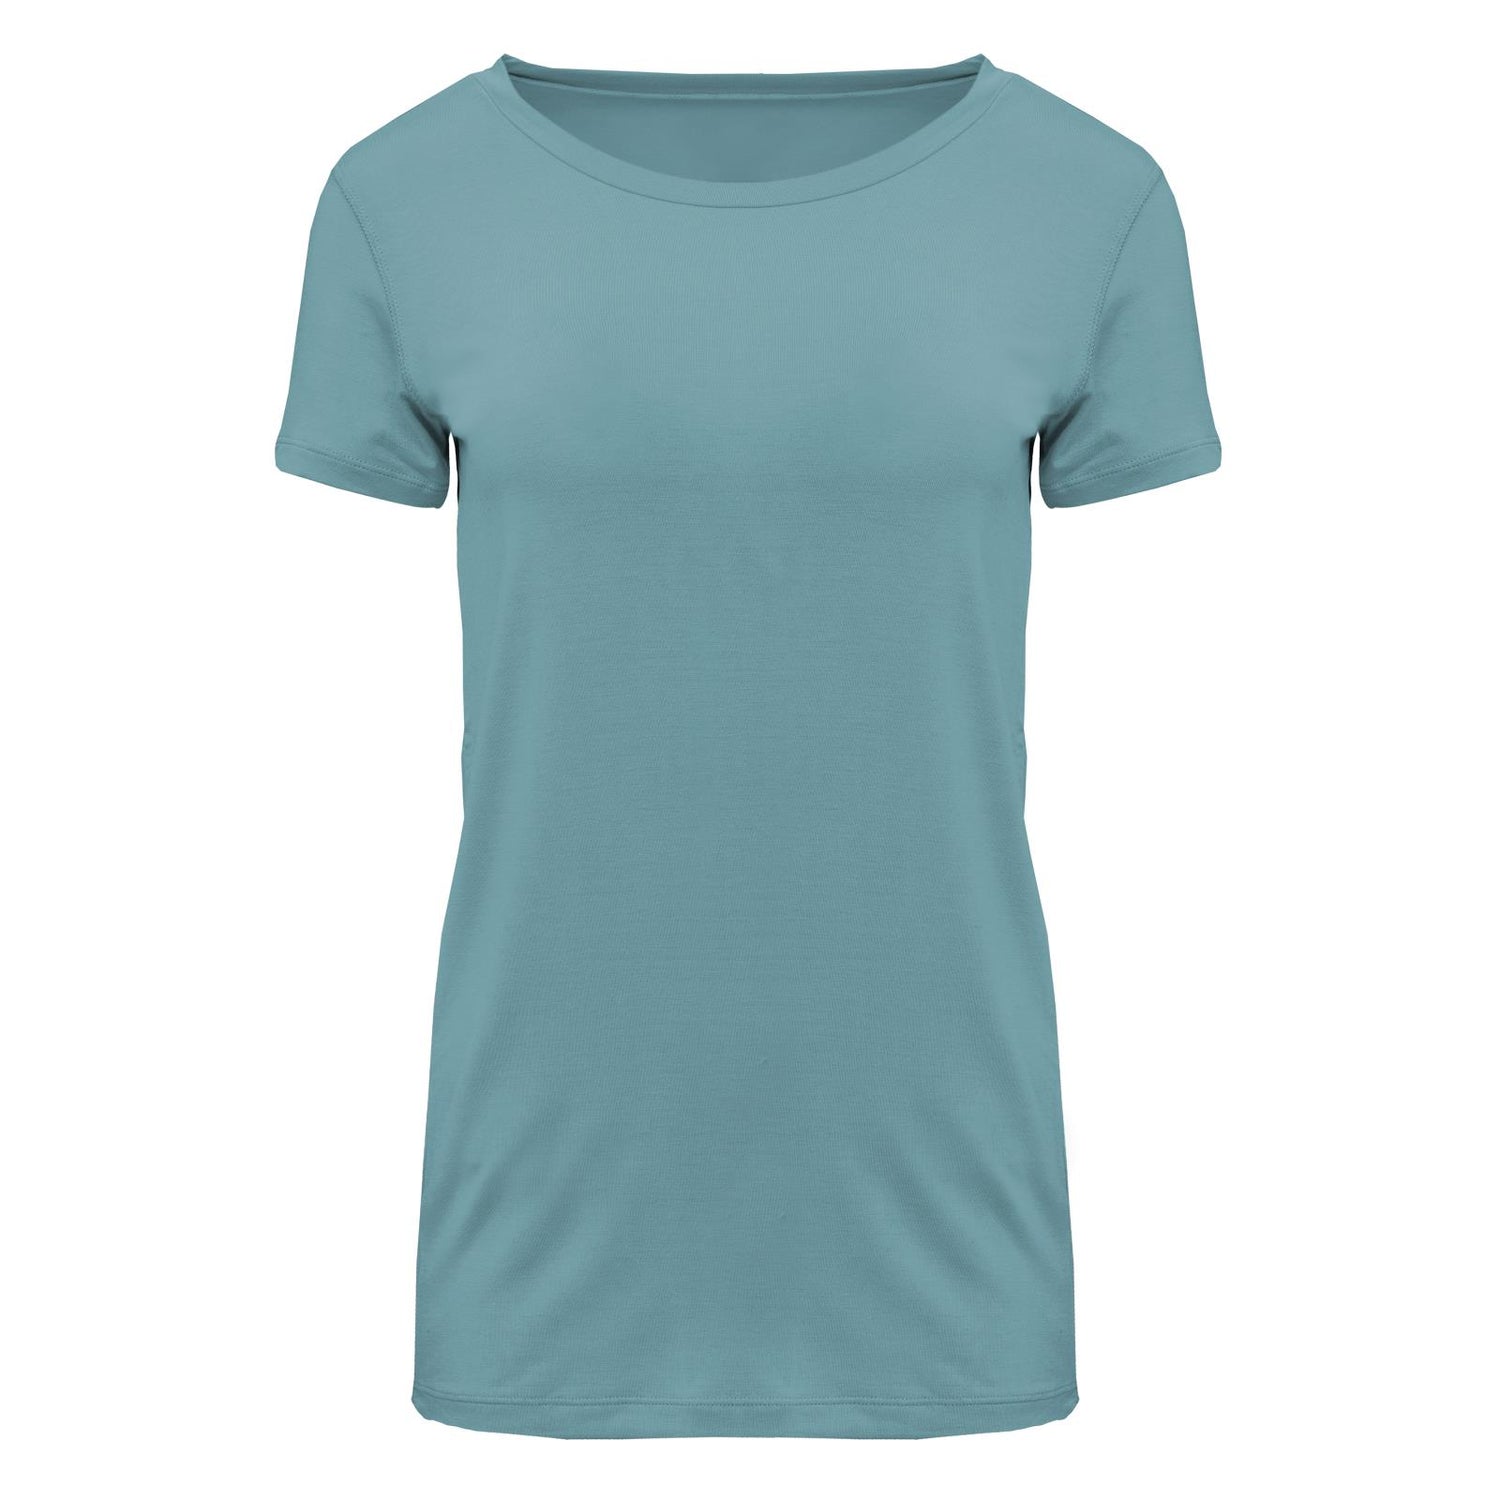 Women's Short Sleeve Relaxed Tee in Glacier